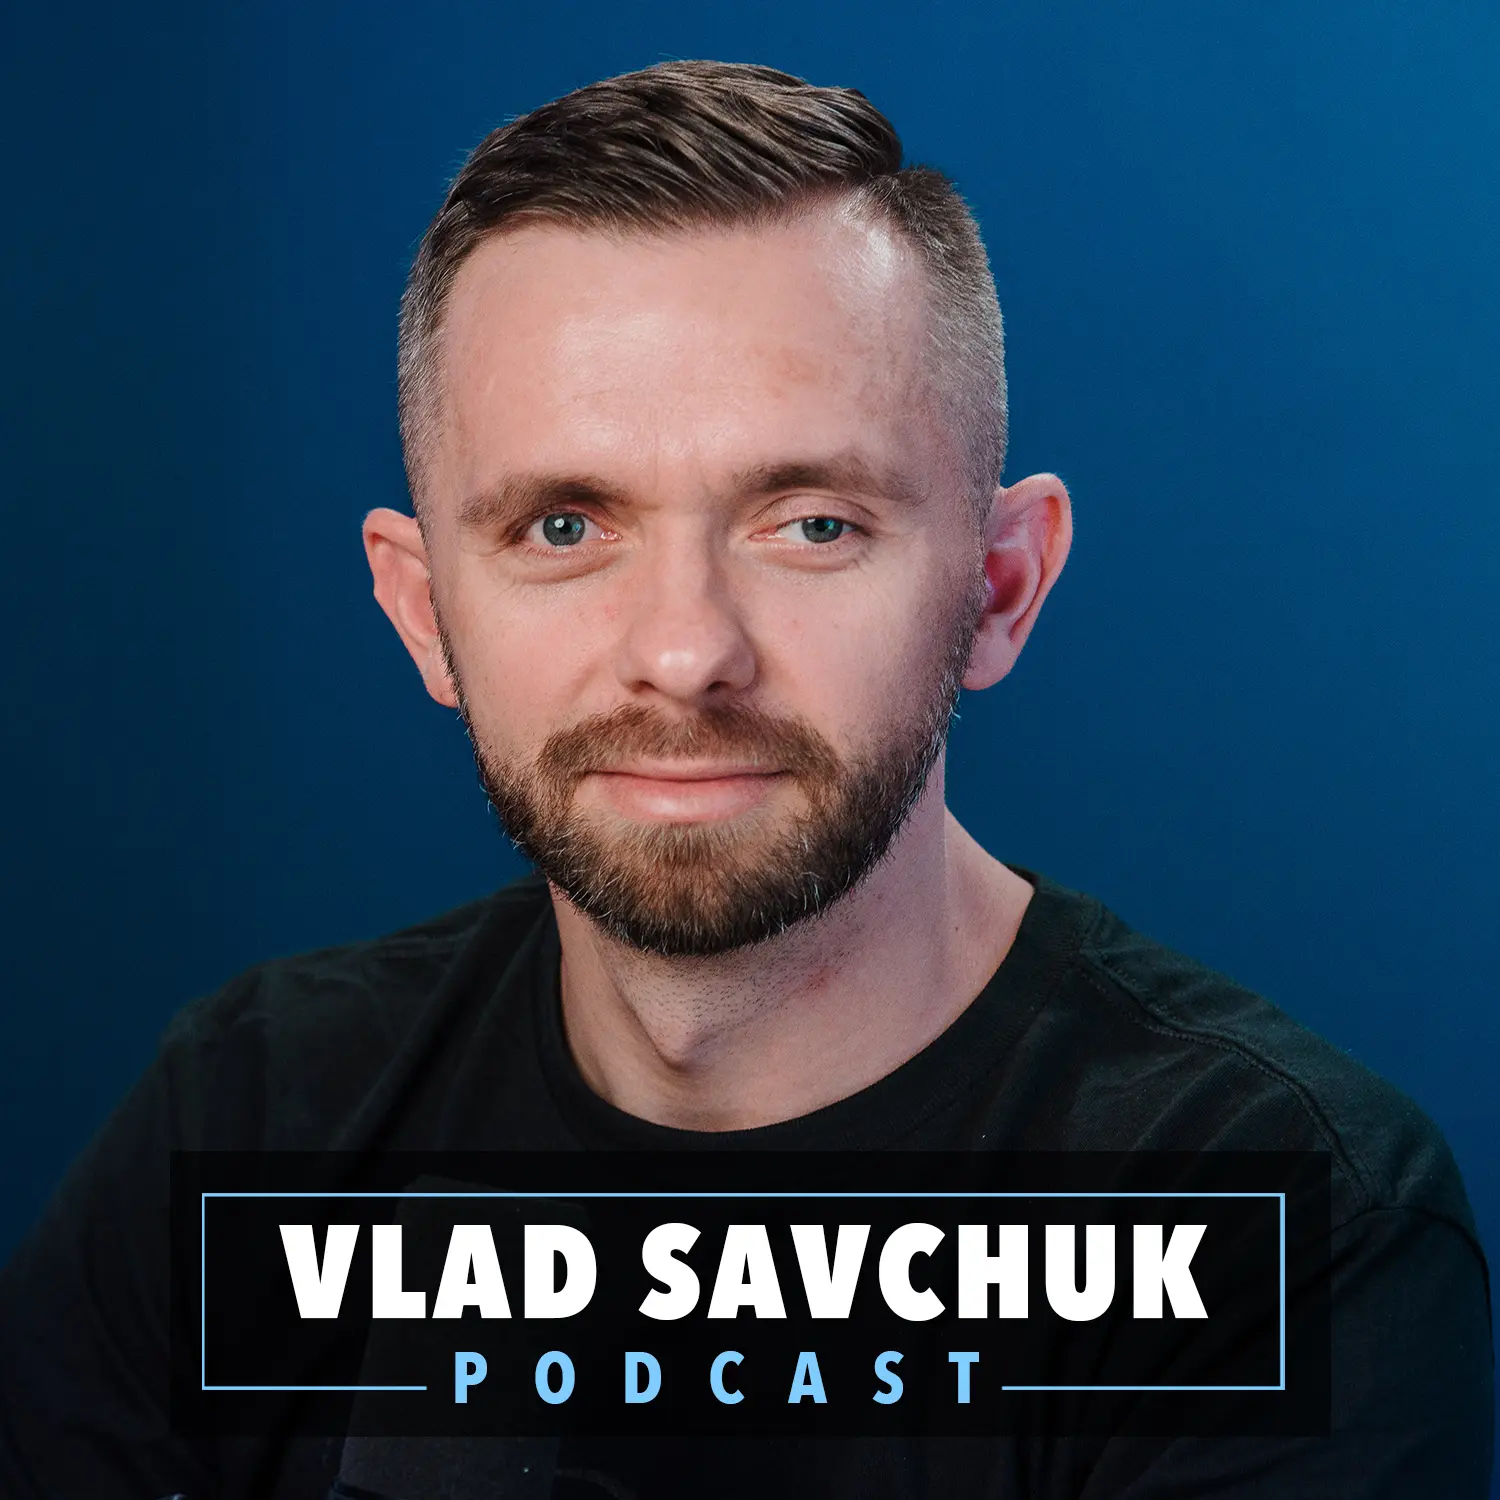 Featured Image for “Vlad Savchuk Podcast”